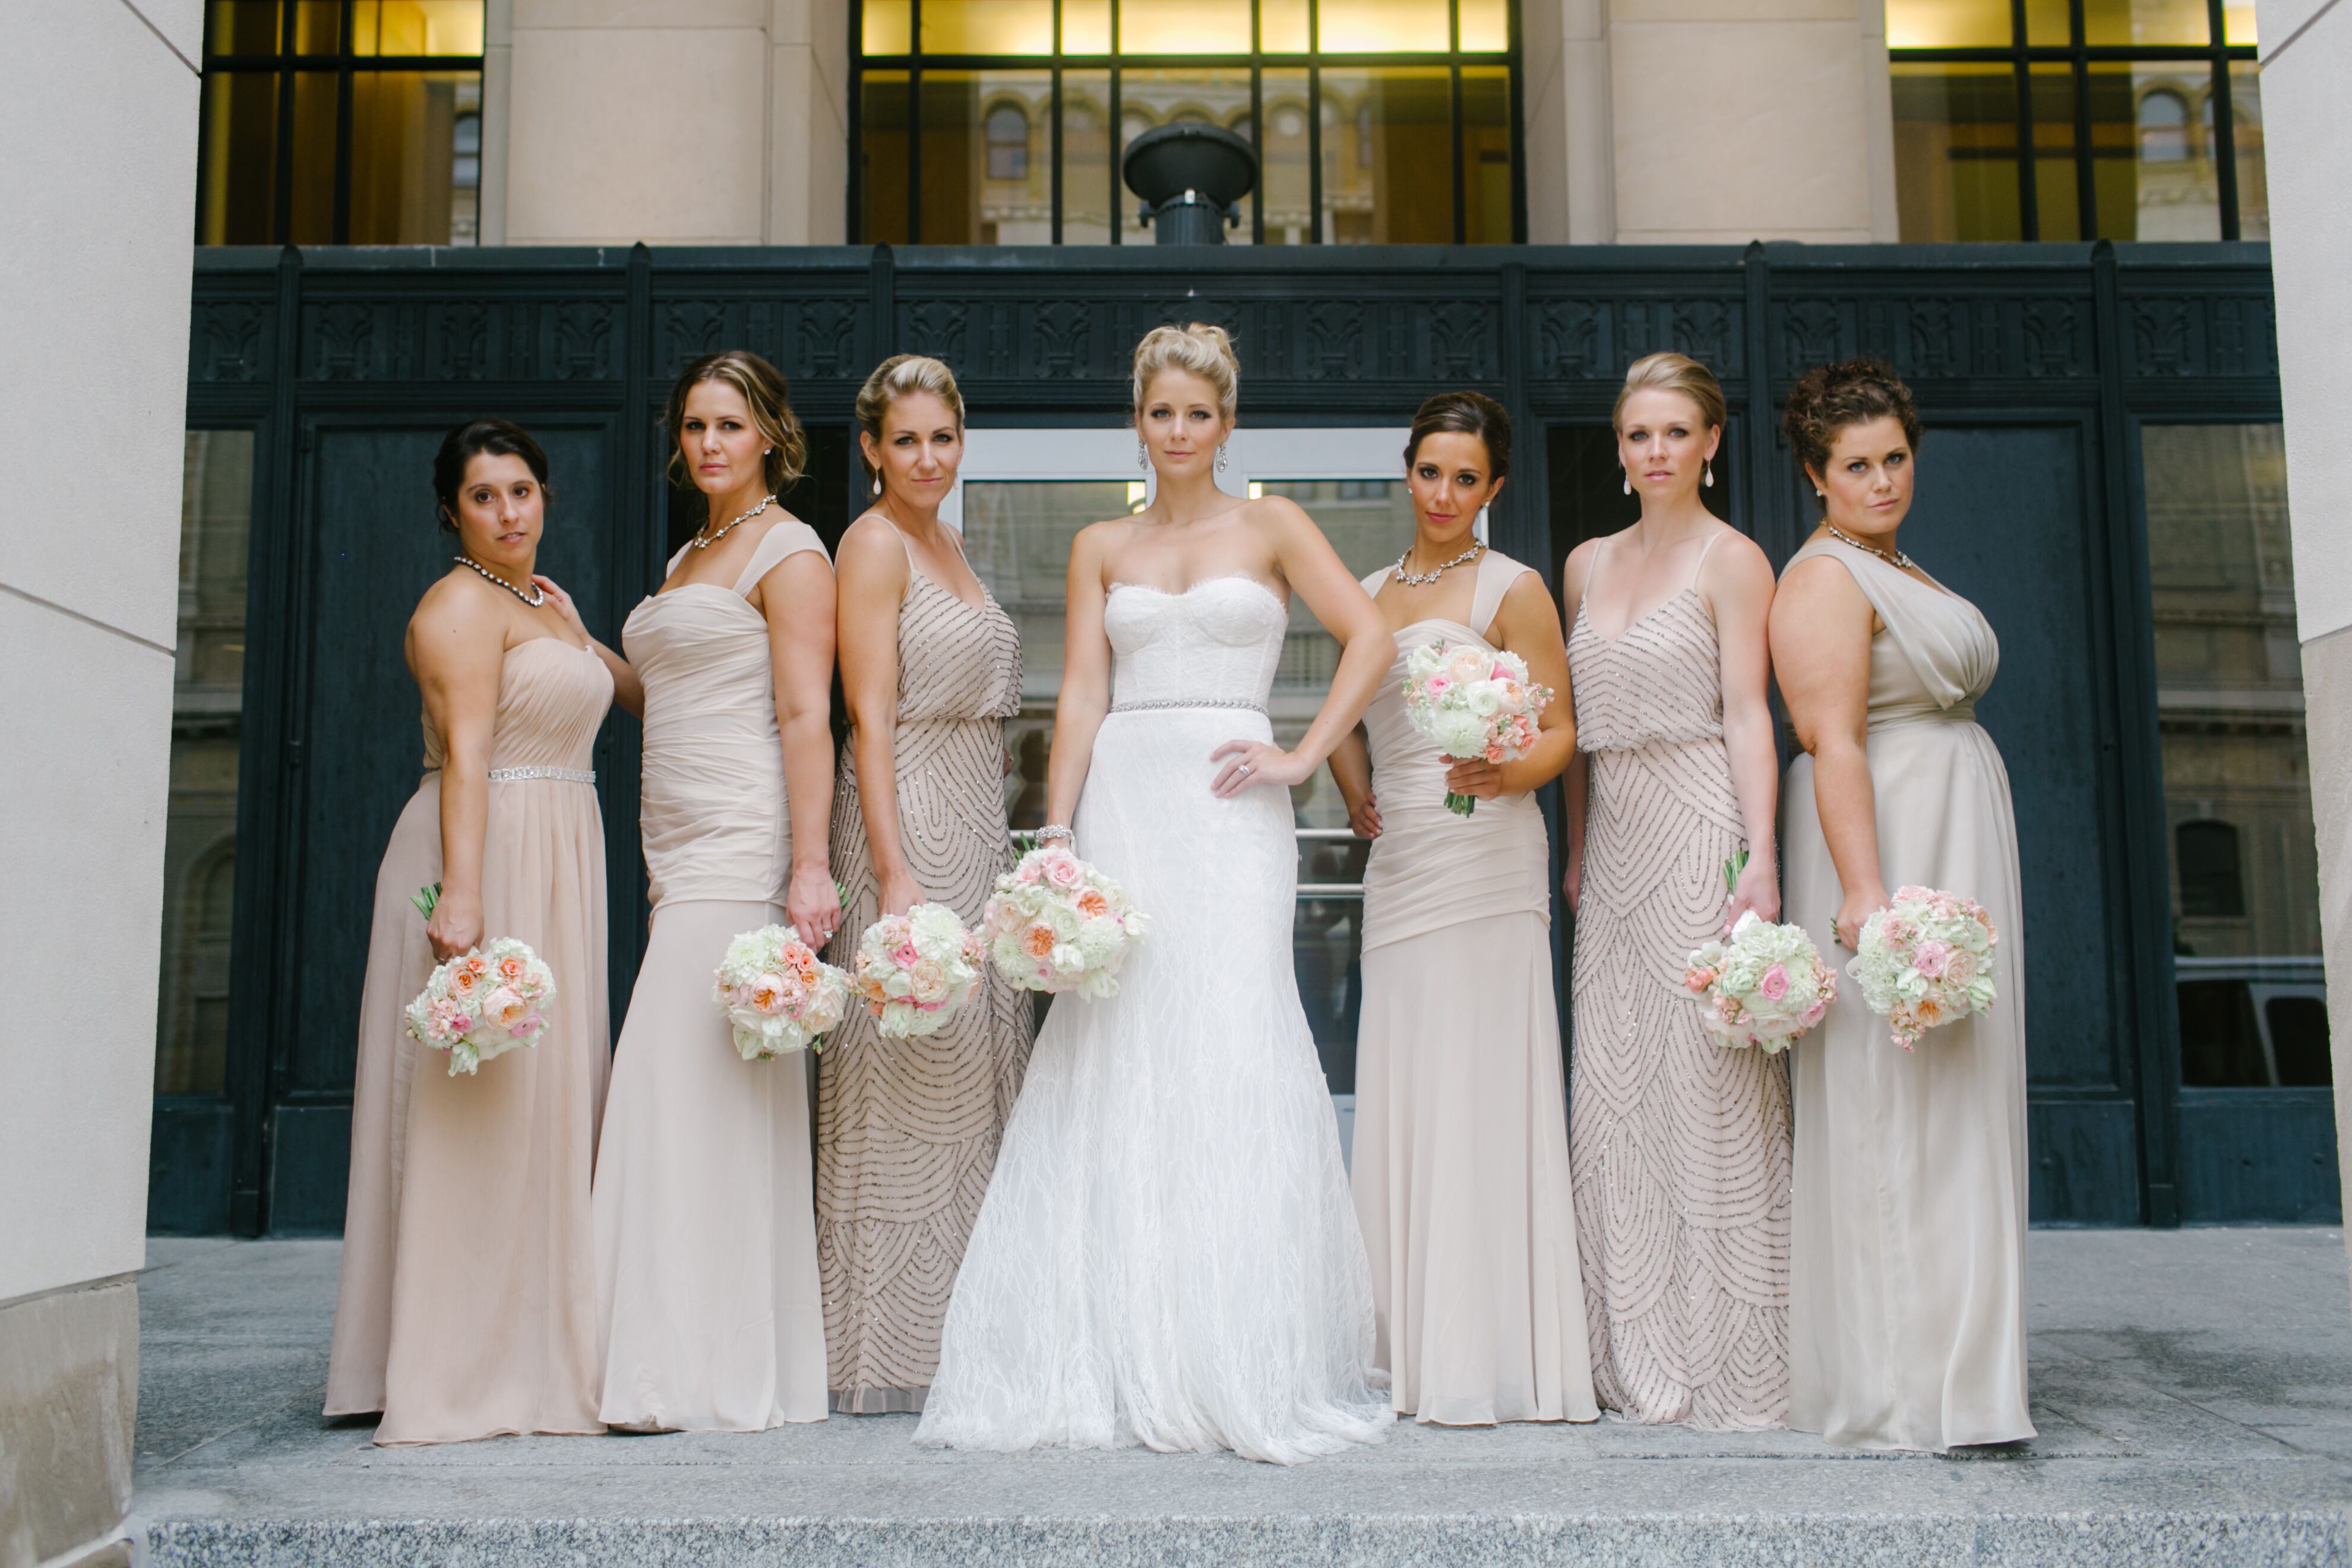 A Classic Hotel Wedding at Amway Grand Plaza Hotel in Grand Rapids ...